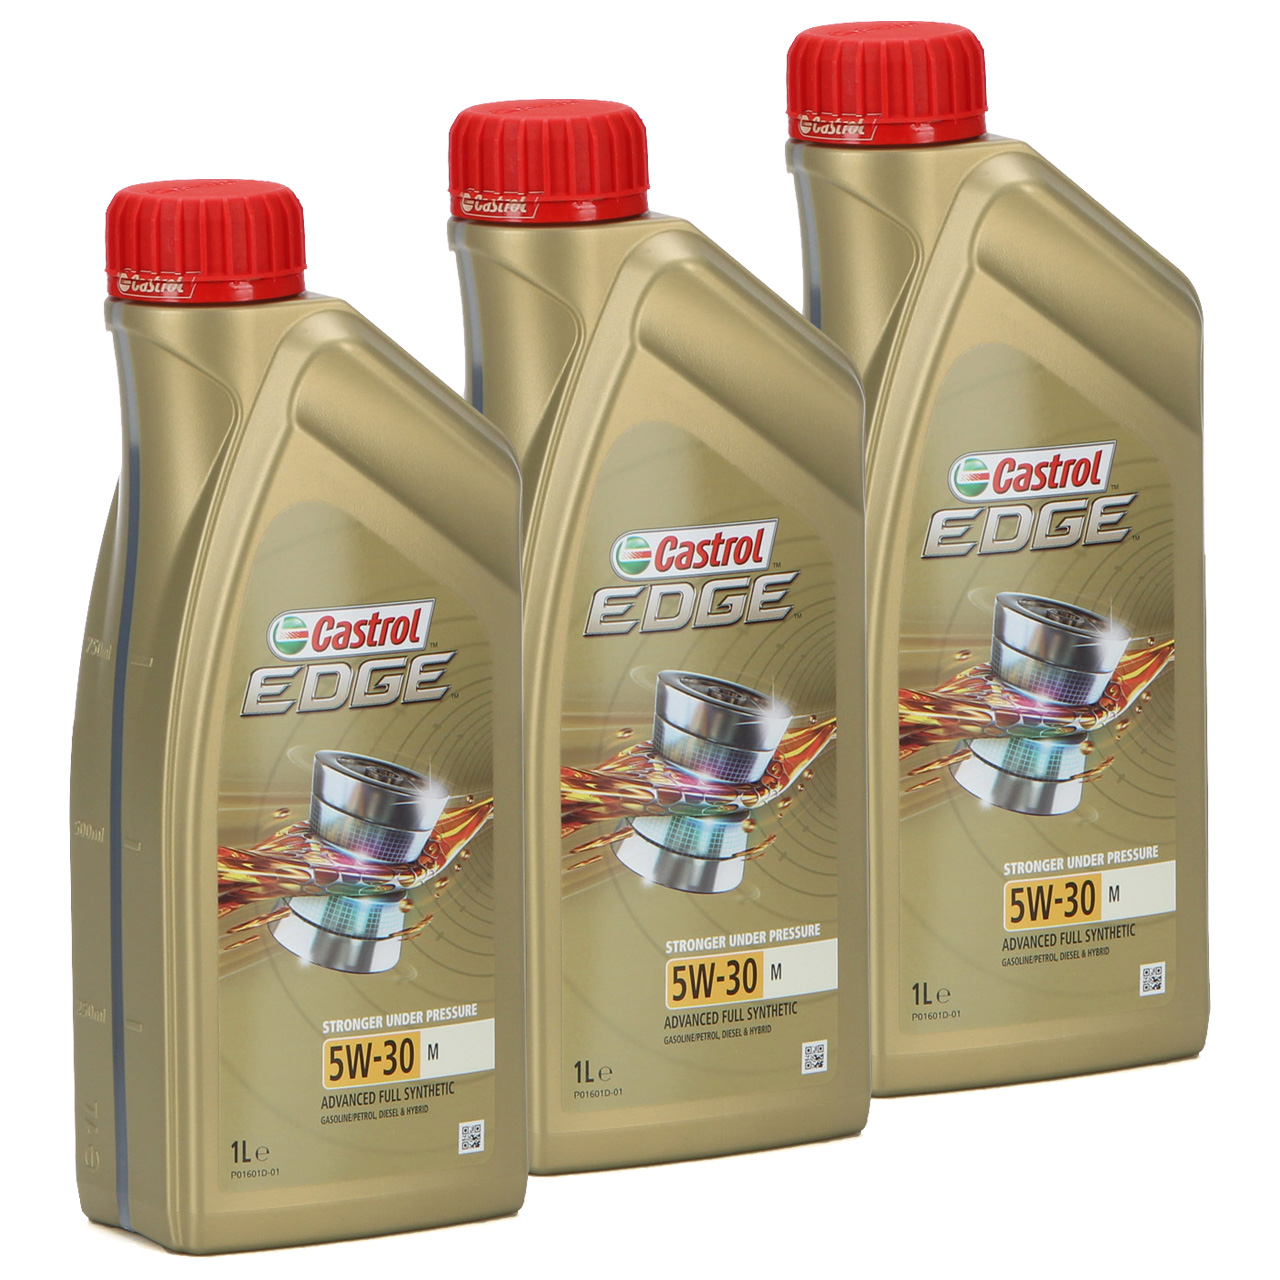 3x Castrol Edge FST 5w-30 Fully Synthetic Engine Oil 1L VW, Longlife (3  Litre)